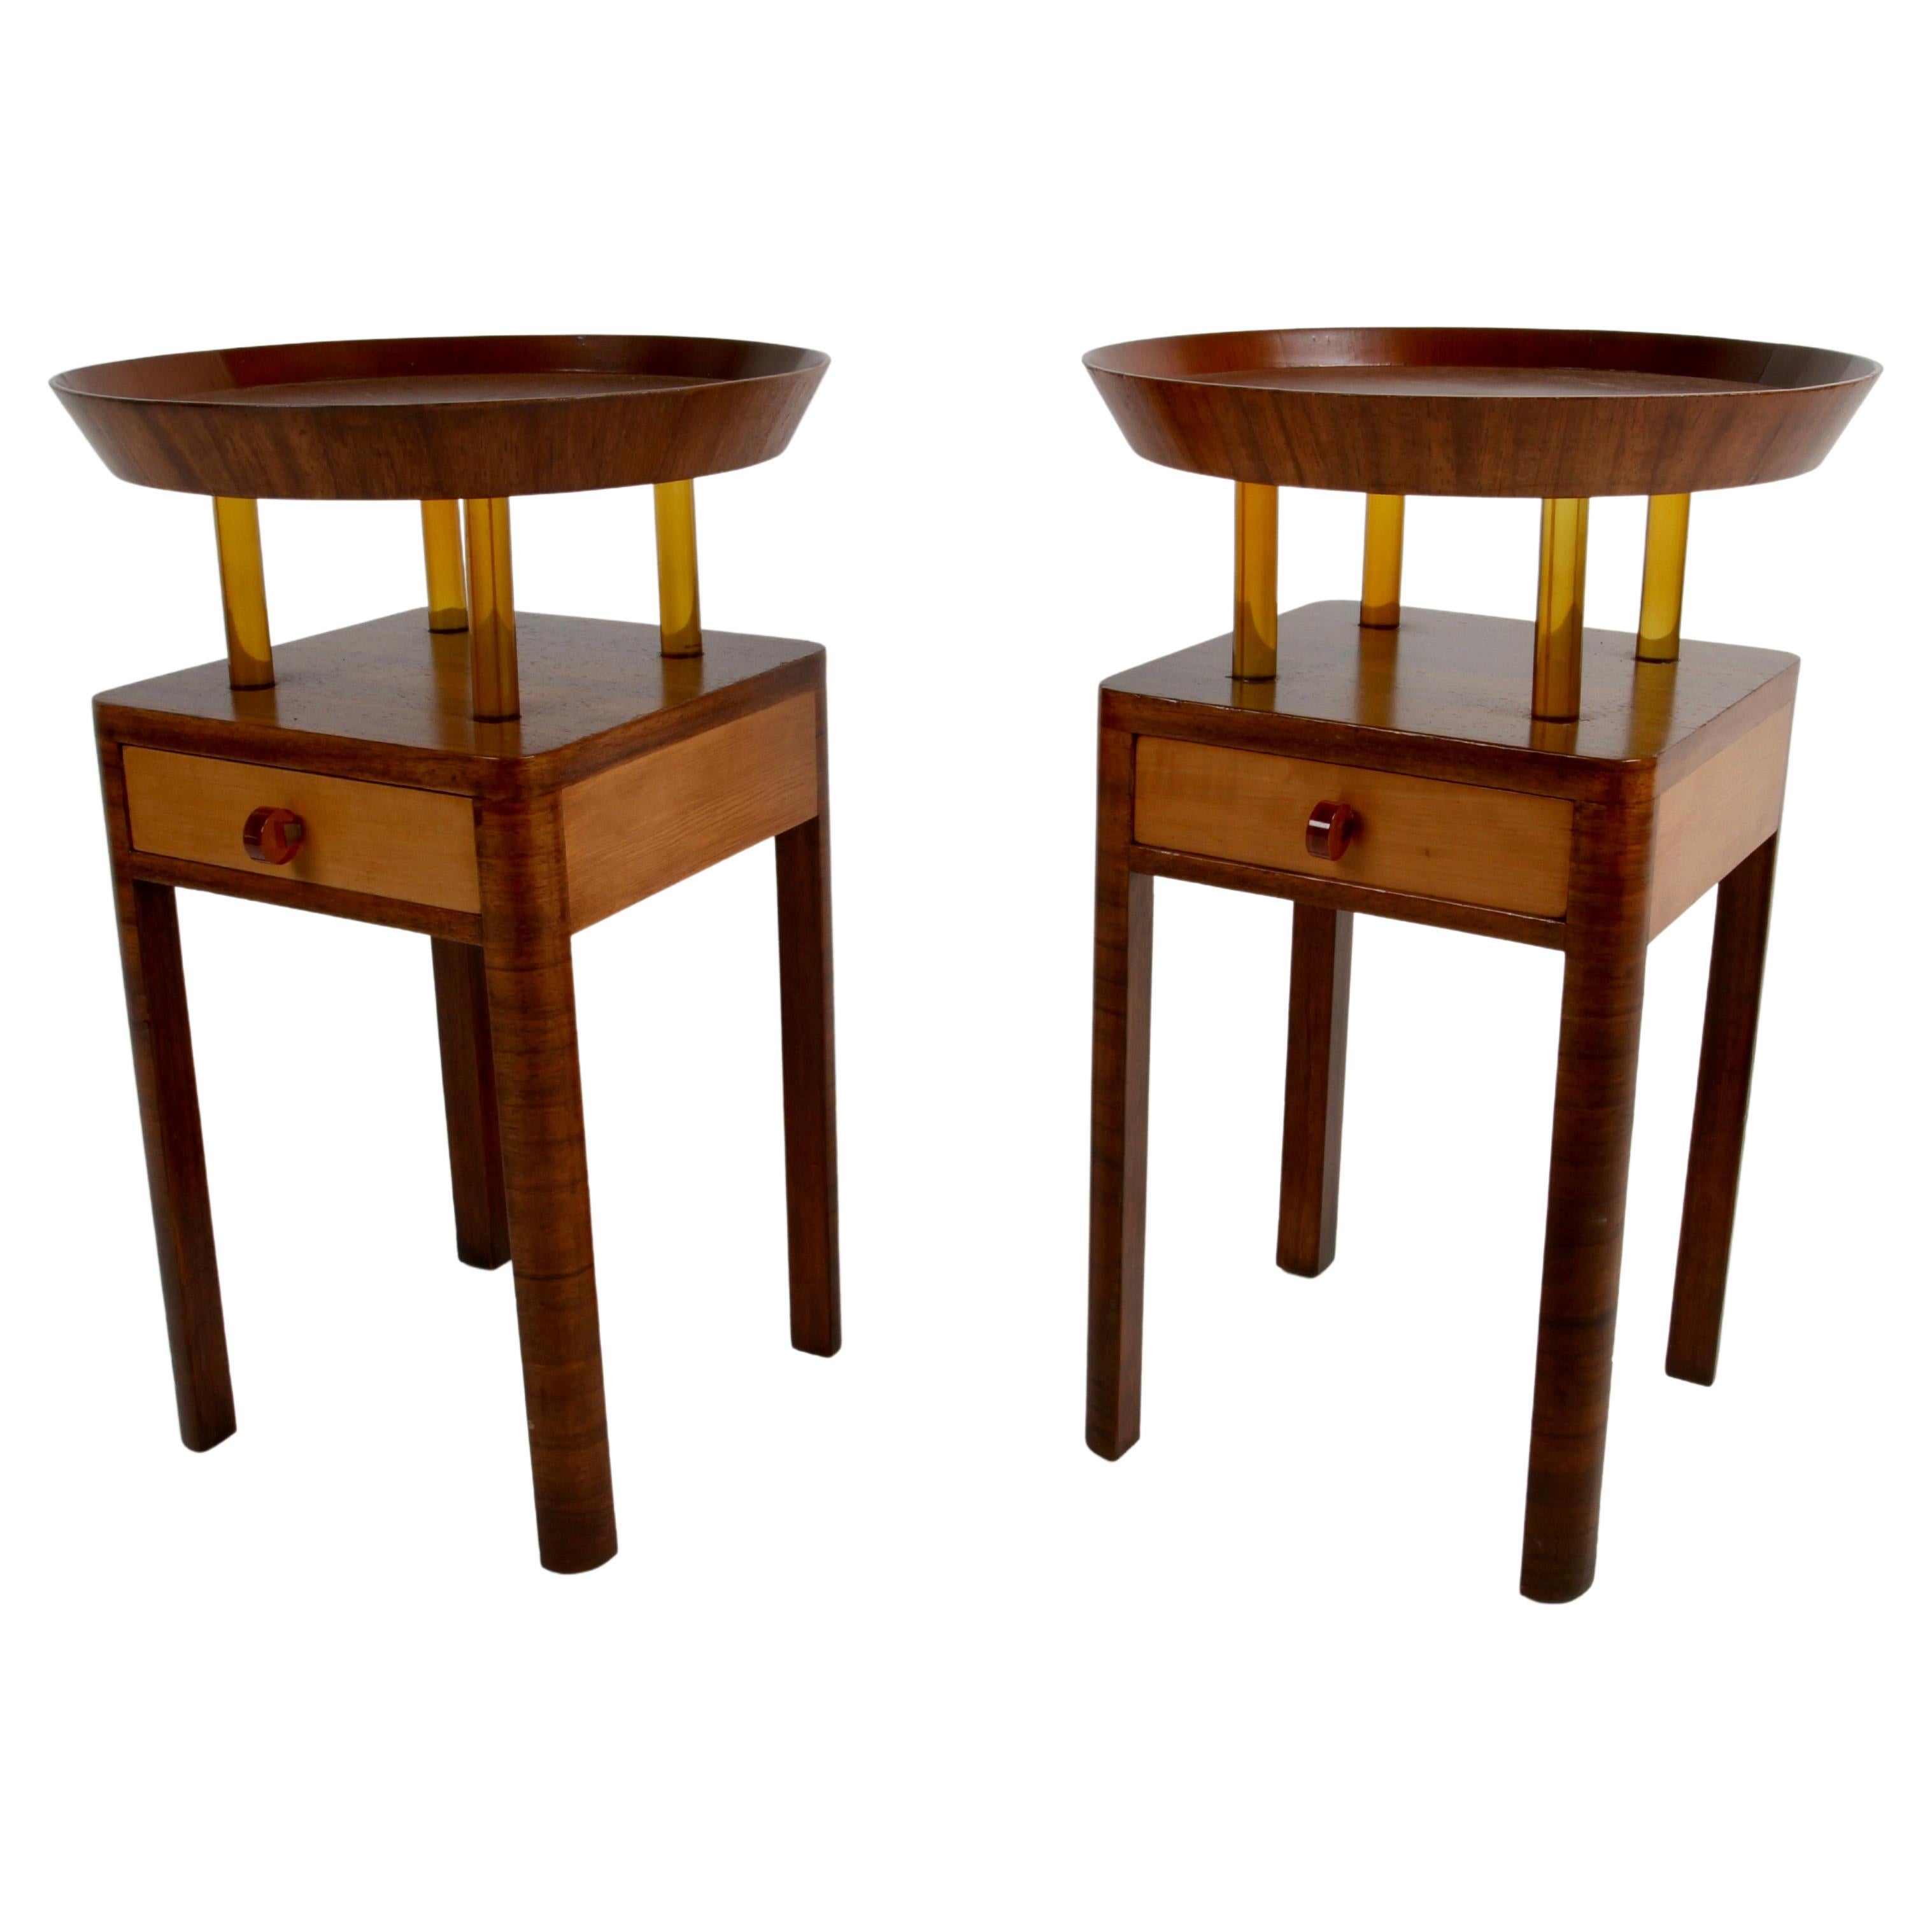 Rare pair of elegant Grosfeld House two-tone Mahogany & Elm end tables or nightstands with Bakelite details first showed up in the 1938 Grosfeld House 